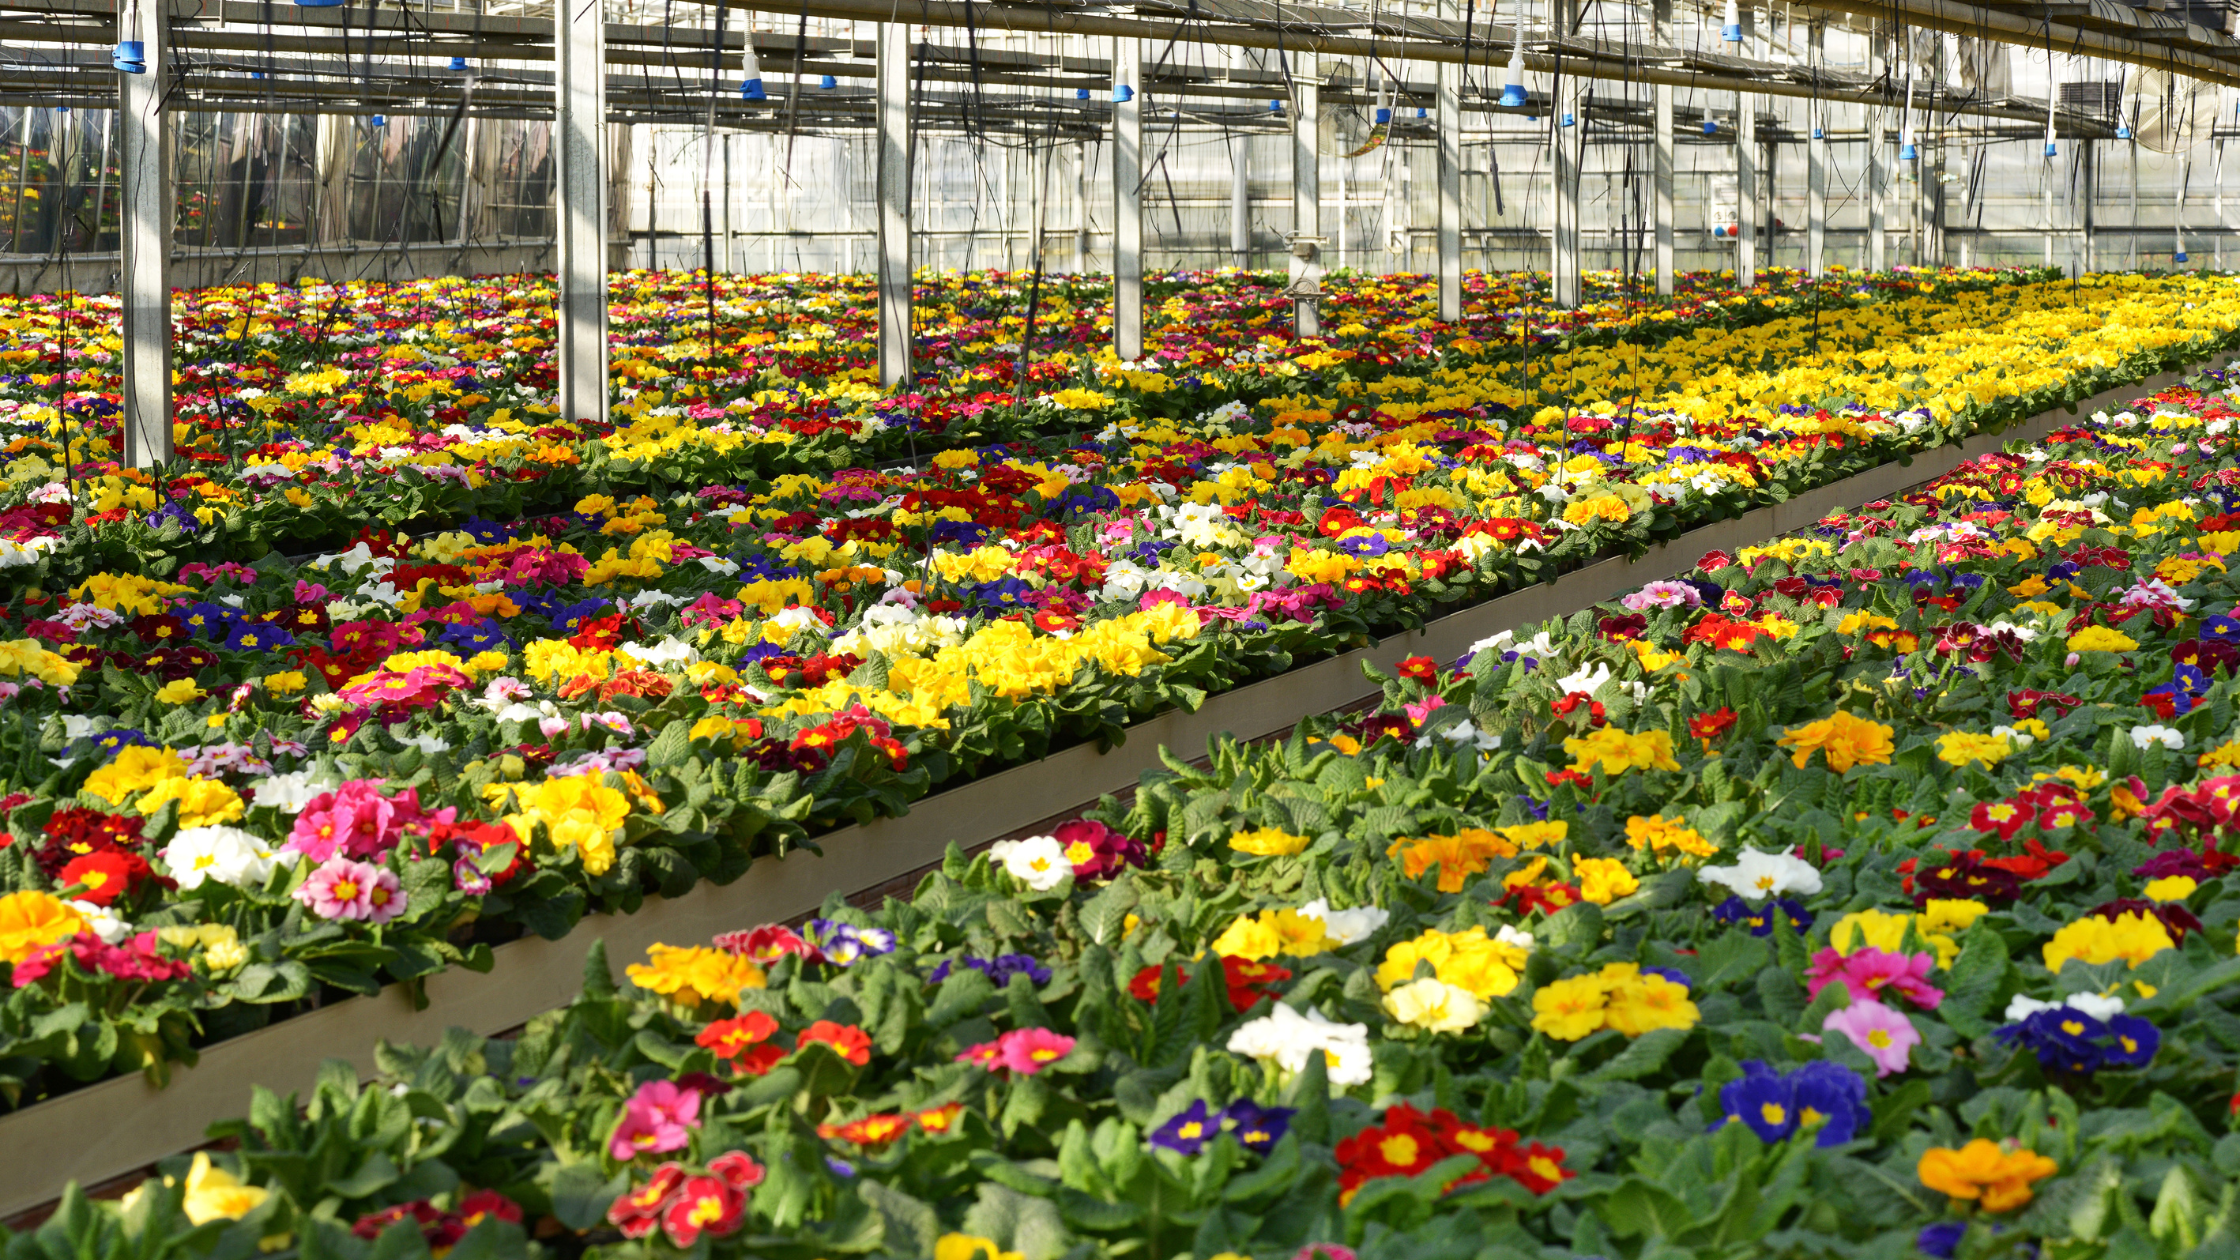 Unveiling the Hidden Costs of the Cut Flowers Industry - Labor Exploitation in the Flower Industry